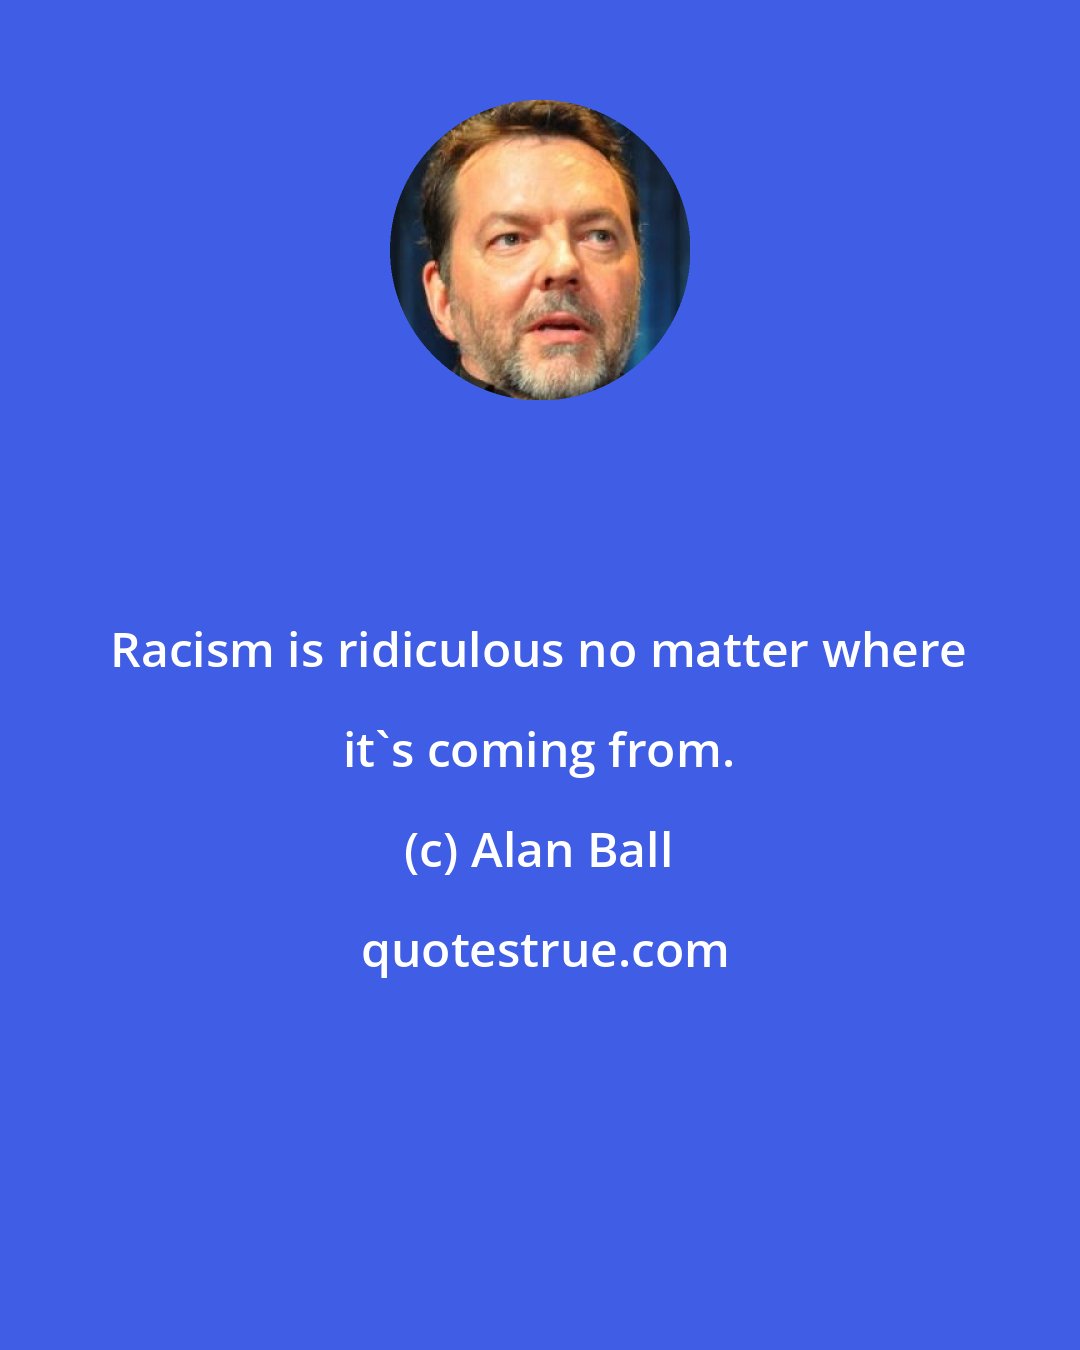 Alan Ball: Racism is ridiculous no matter where it's coming from.